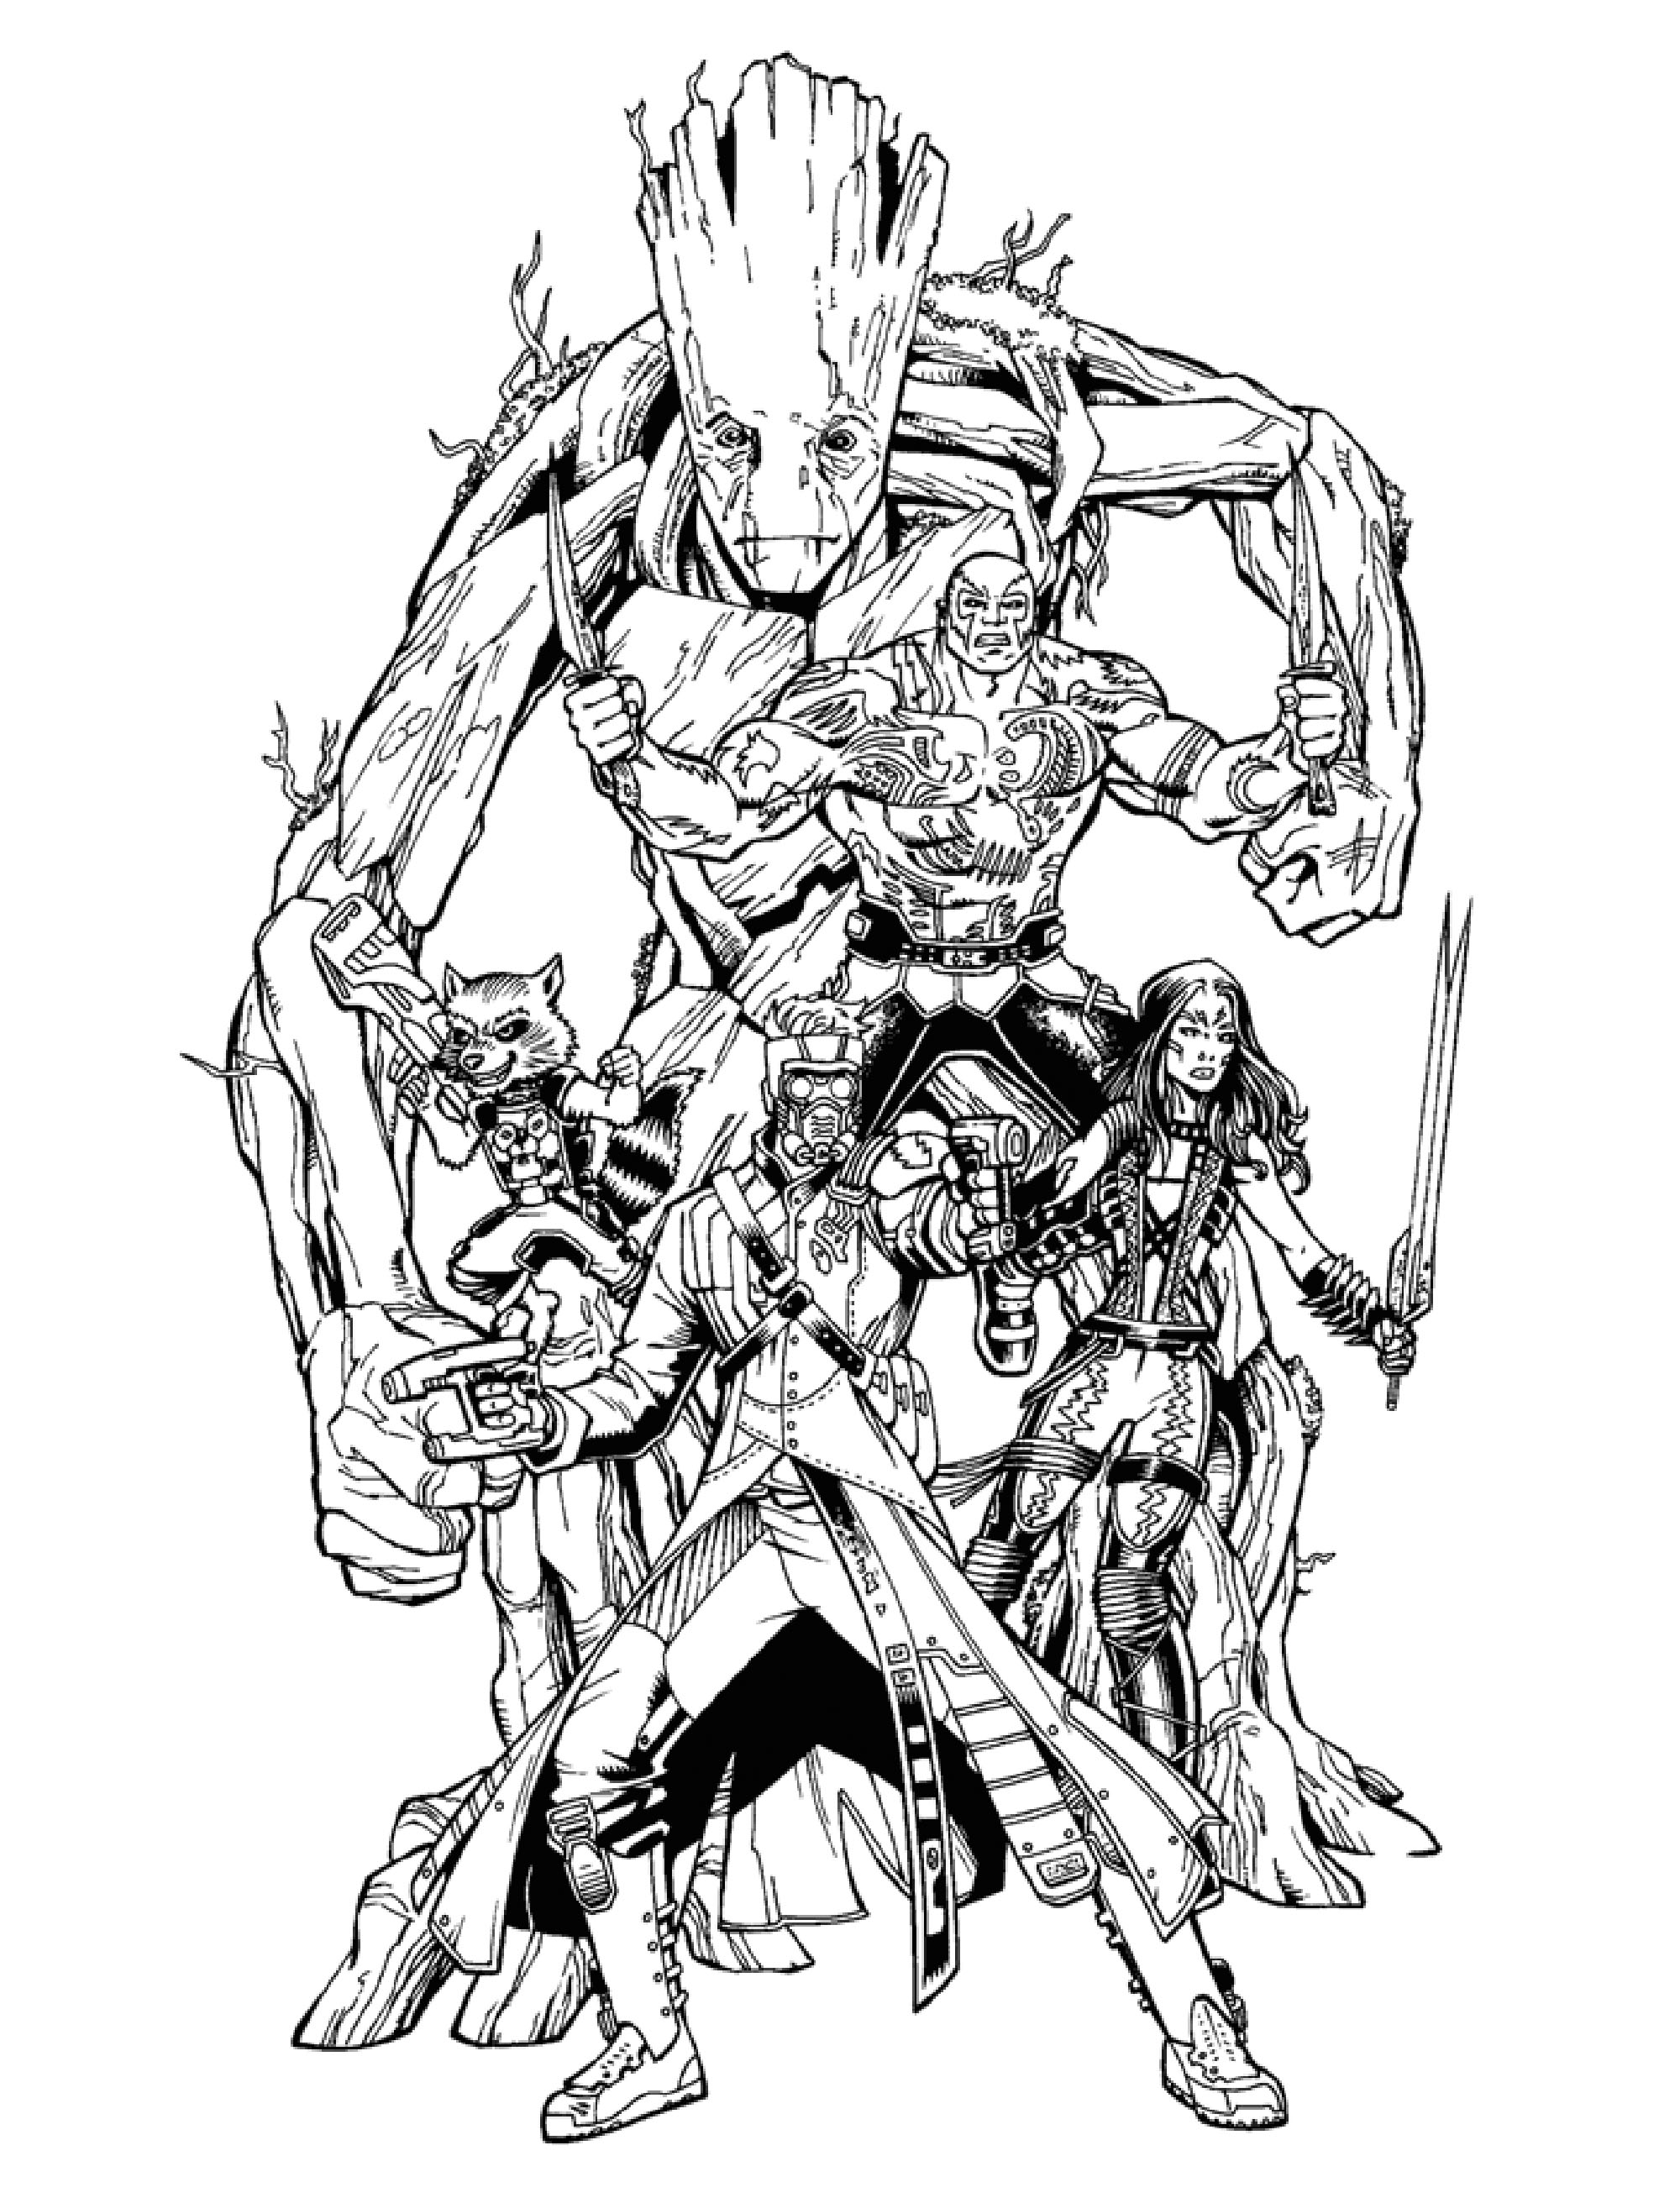 Funny Guardians of Galaxy coloring page : Groot, Rocket Raccoon, Star-Lord, Drax and Gamora